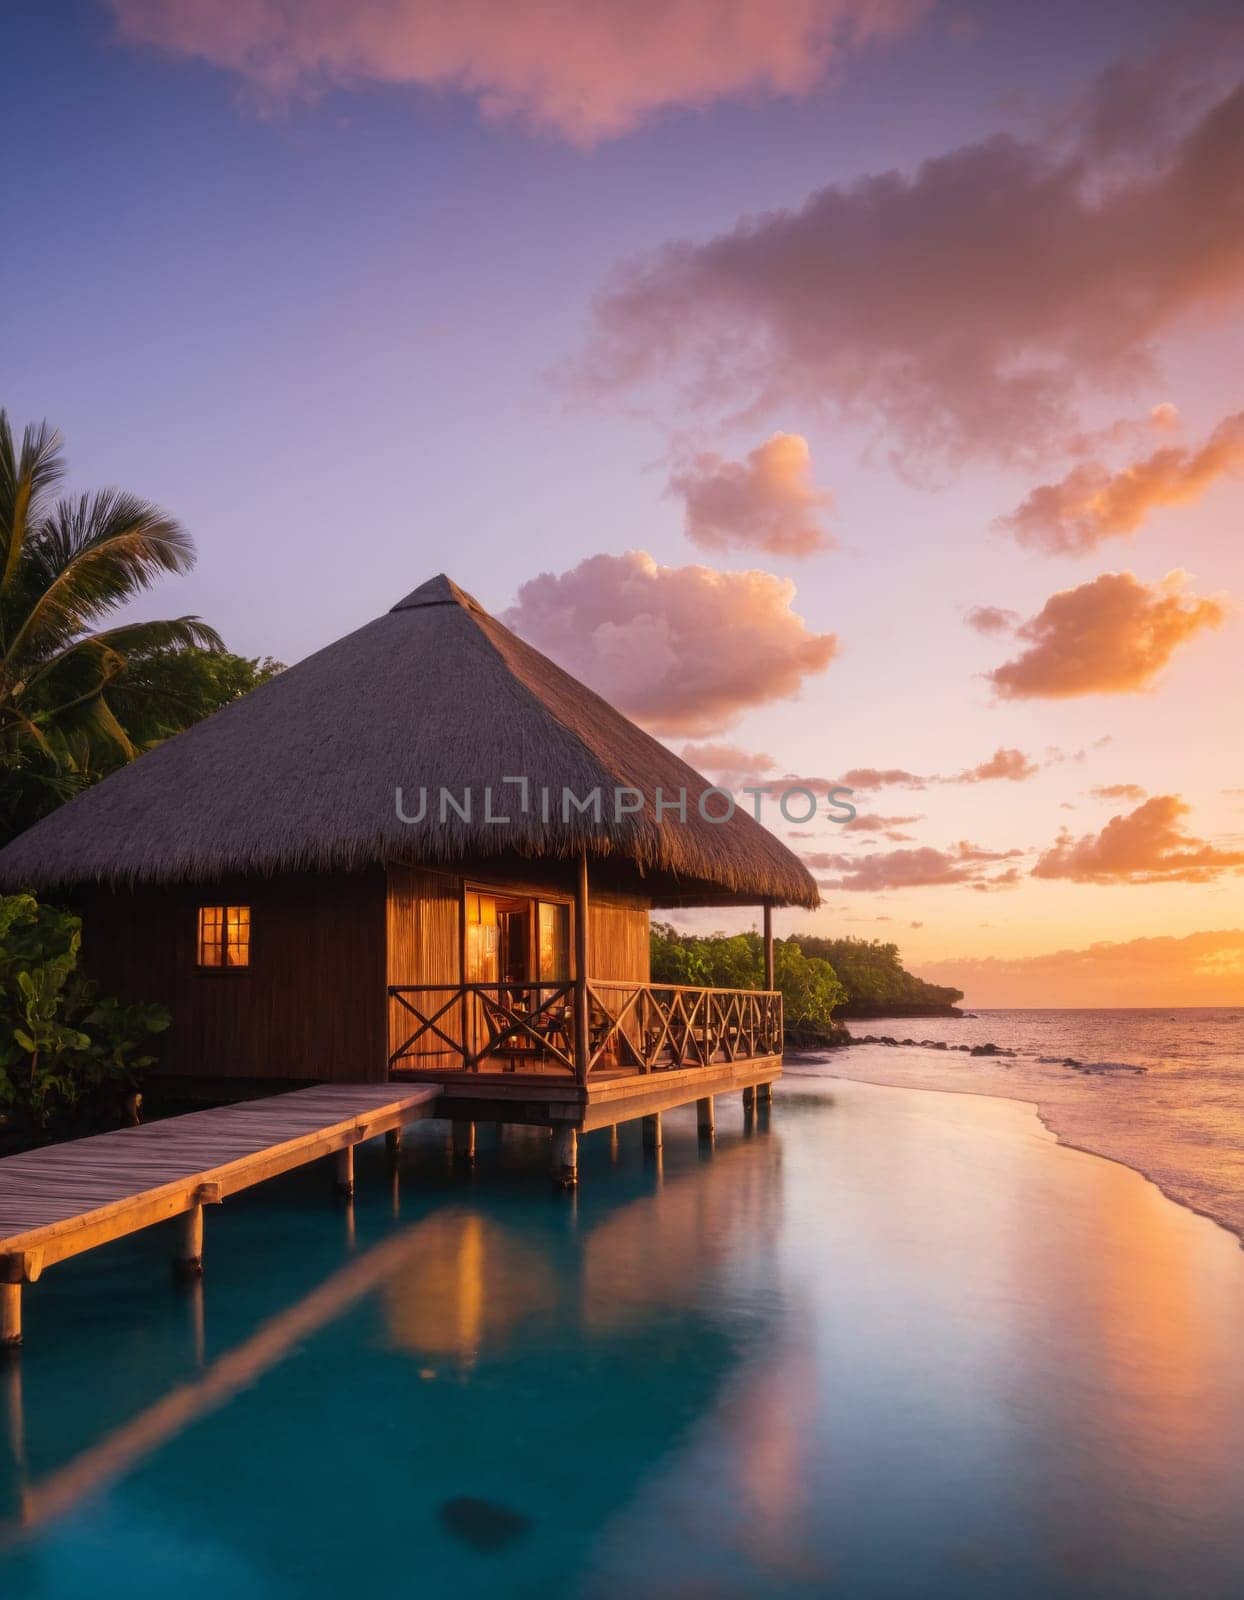 Tropical overwater bungalow at sunset by Andre1ns